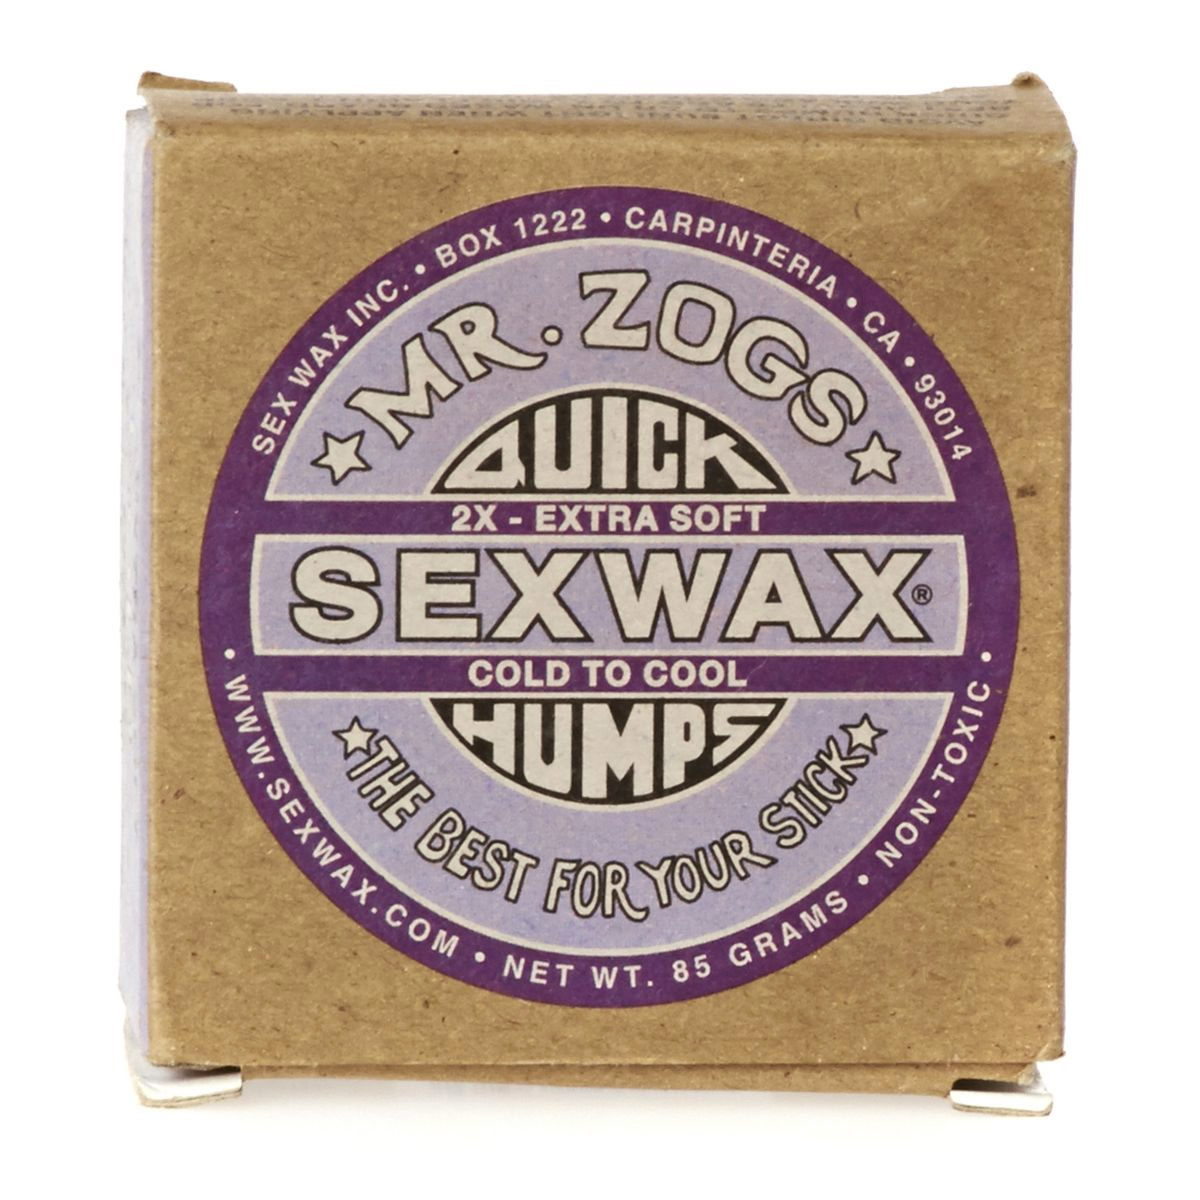 Mild cold. SEXWAX. The cool and the Cold. Cold softness.